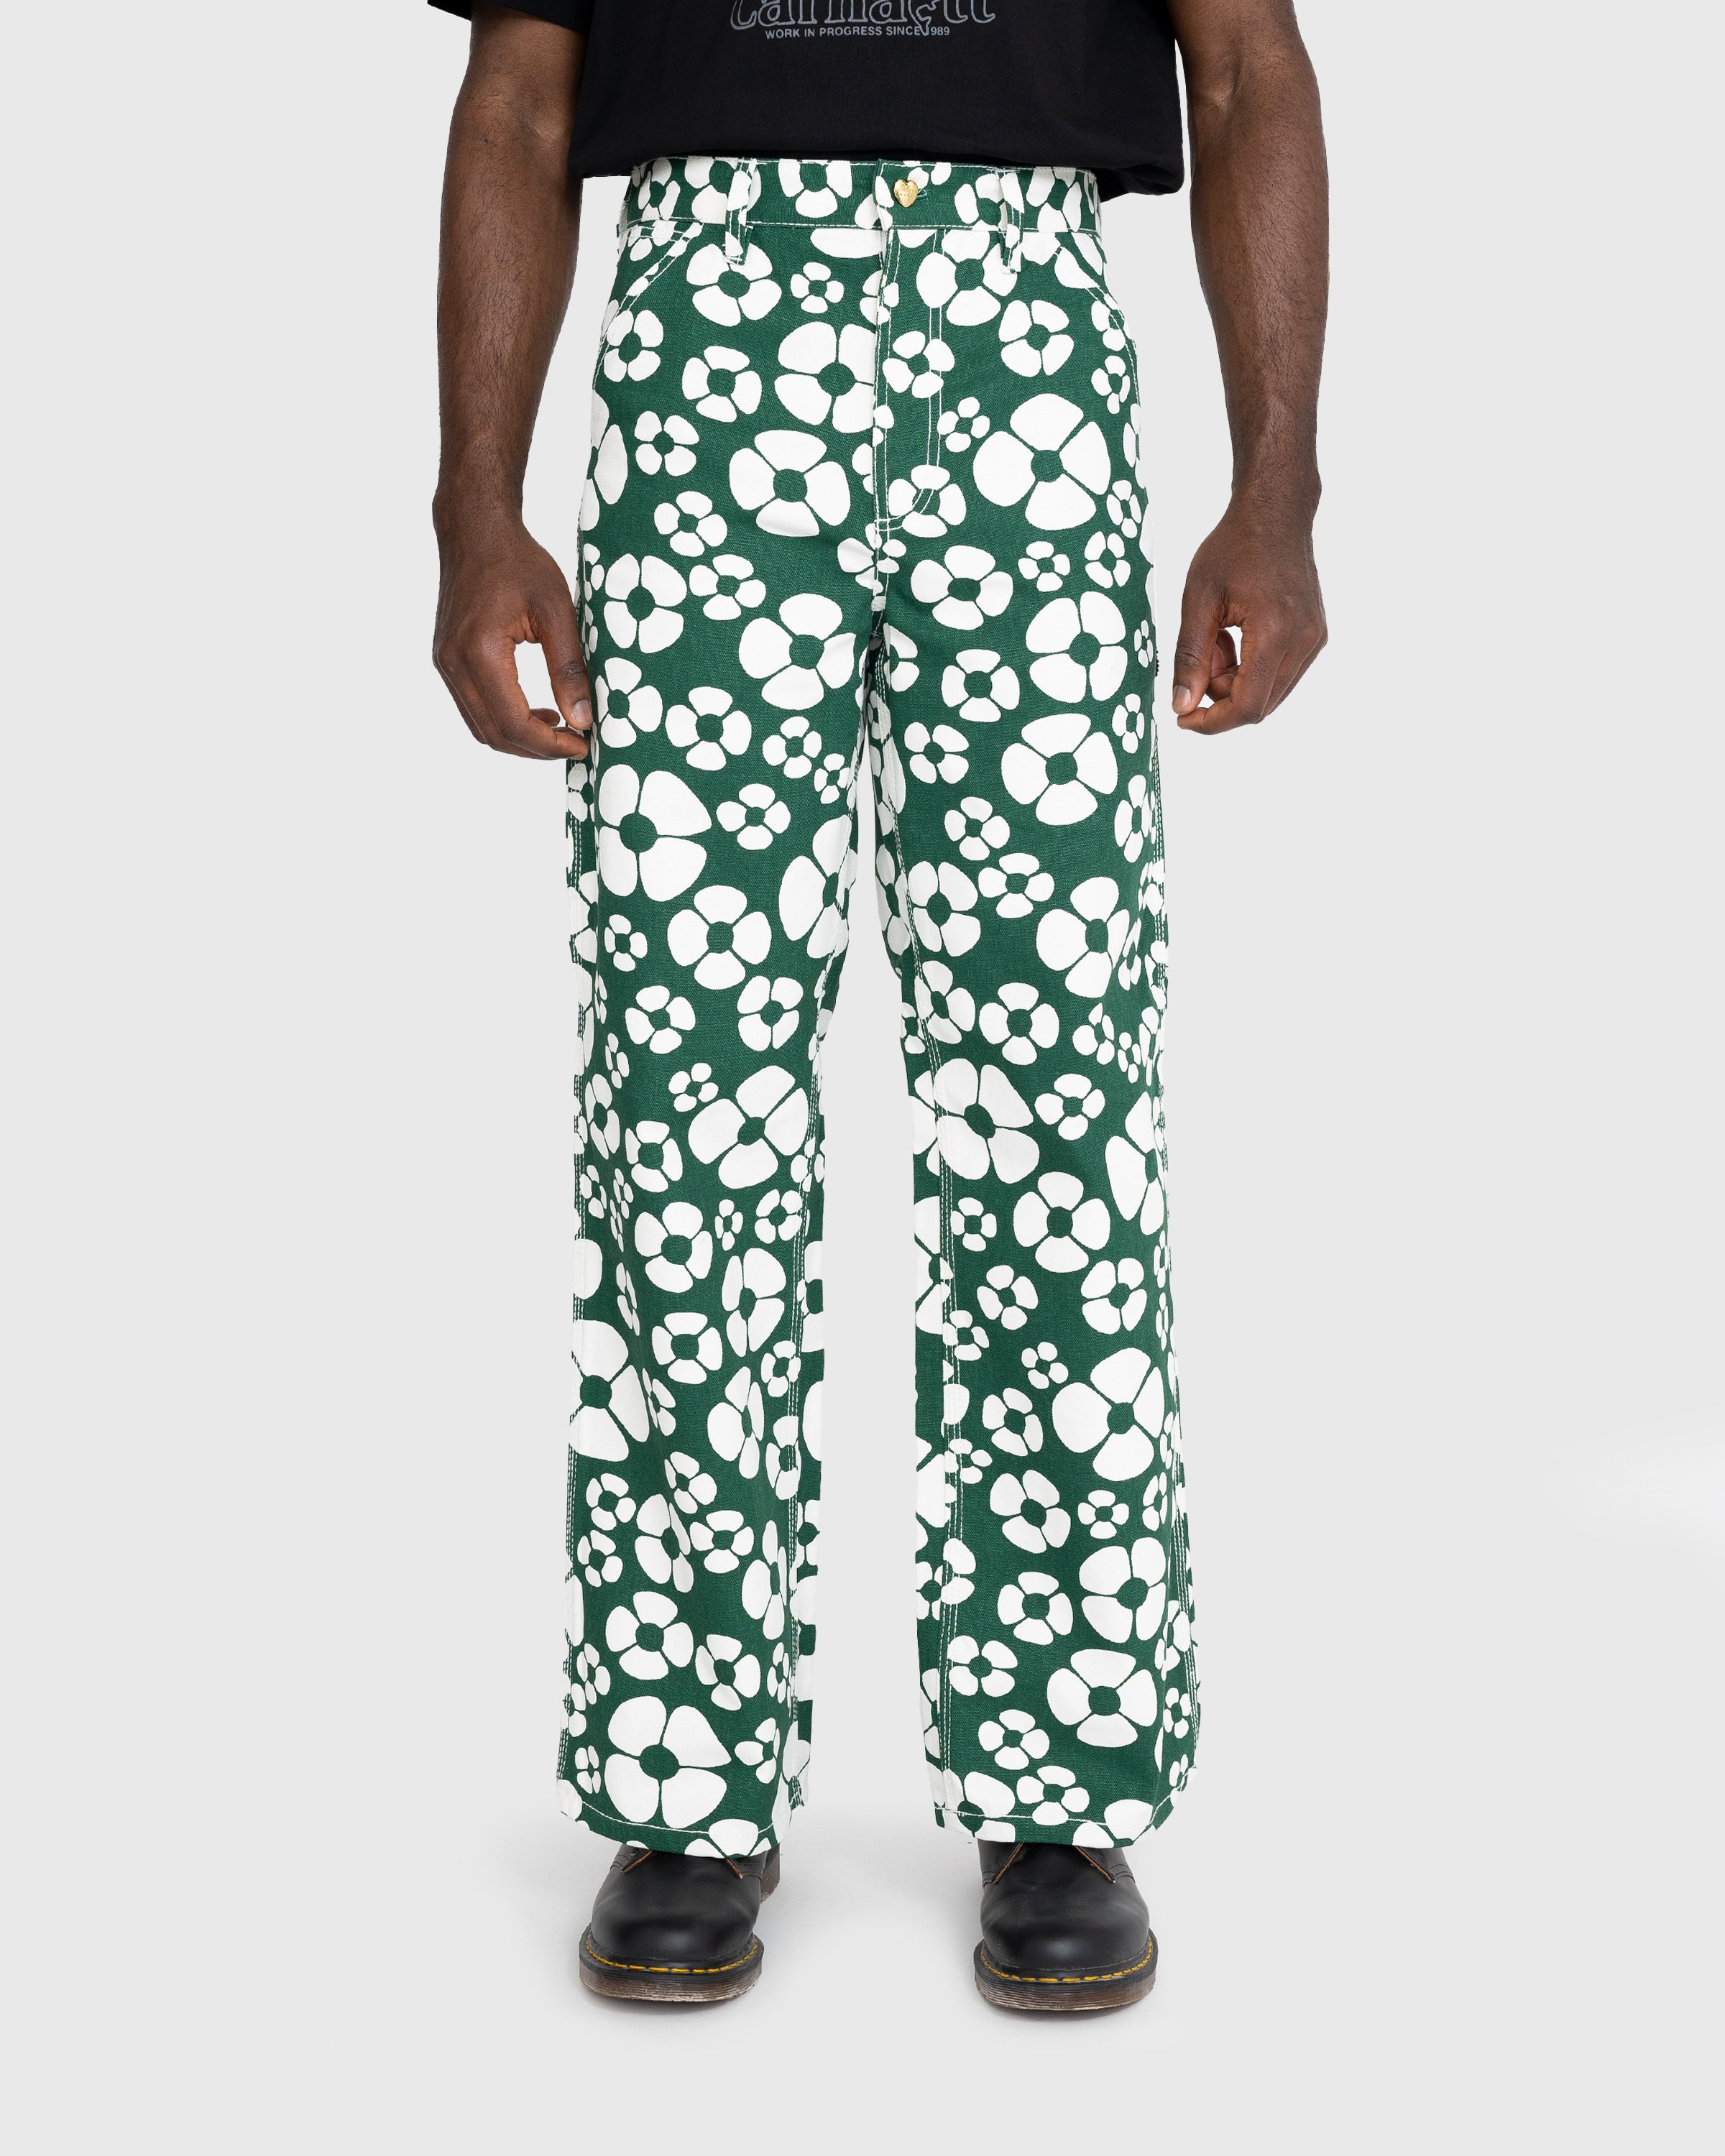 Marni x Carhartt WIP - Floral Trousers Green - Clothing - Green - Image 2